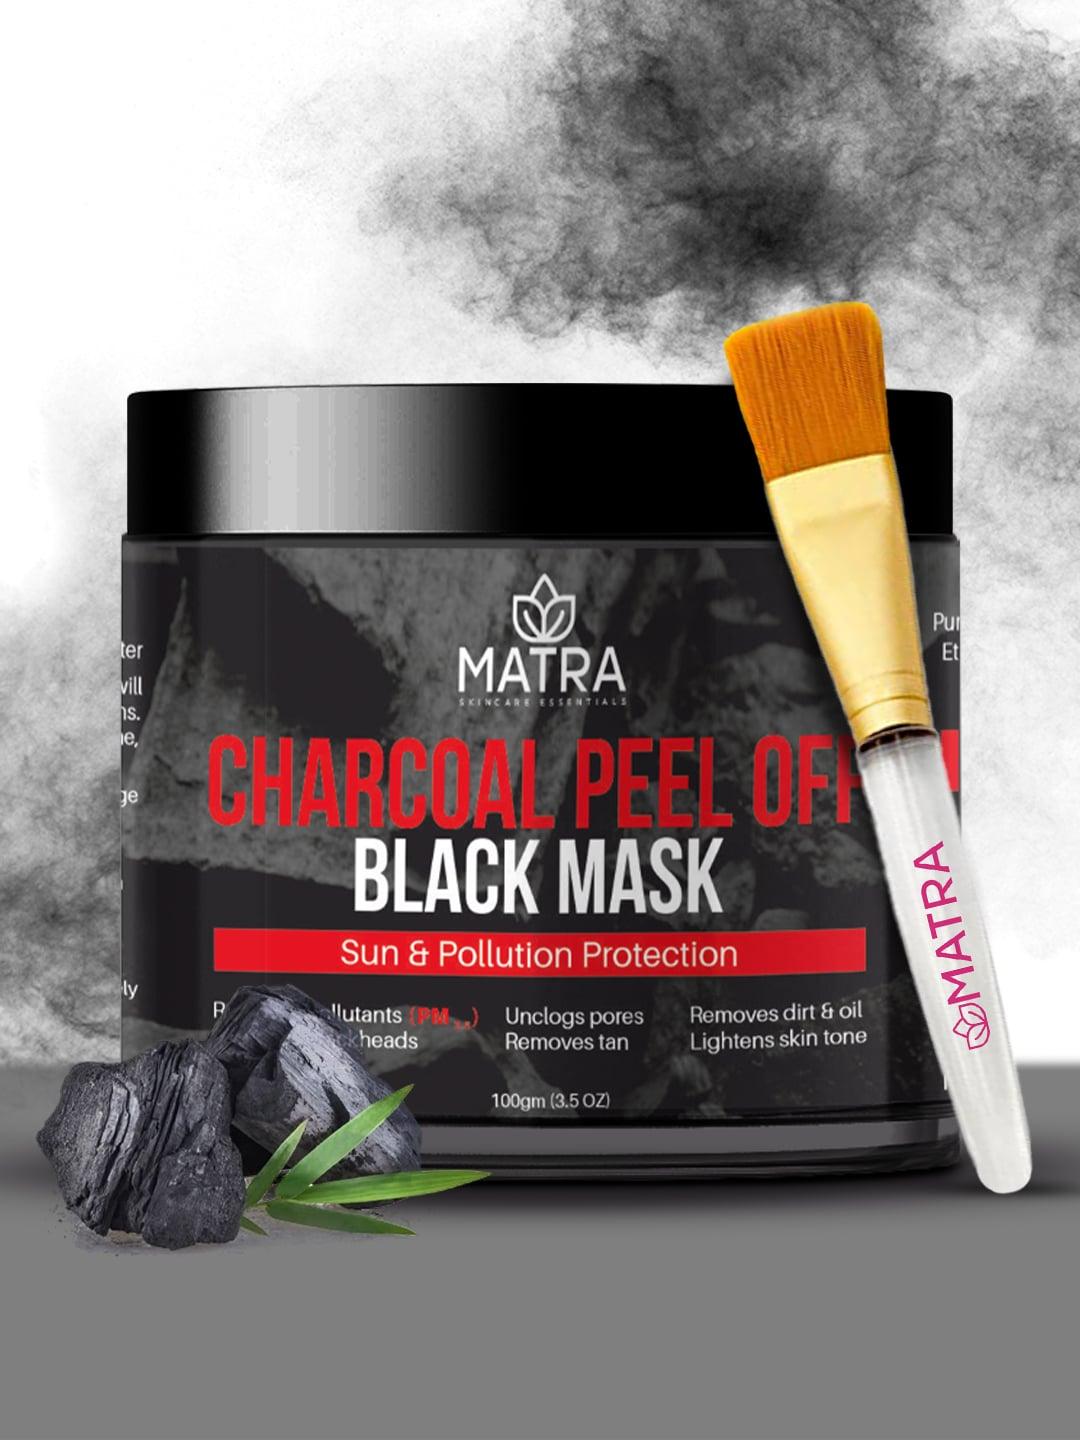 MATRA Sun & Pollution Protection Charcoal Peel Off Black Mask with Face Mask Brush - 100 g